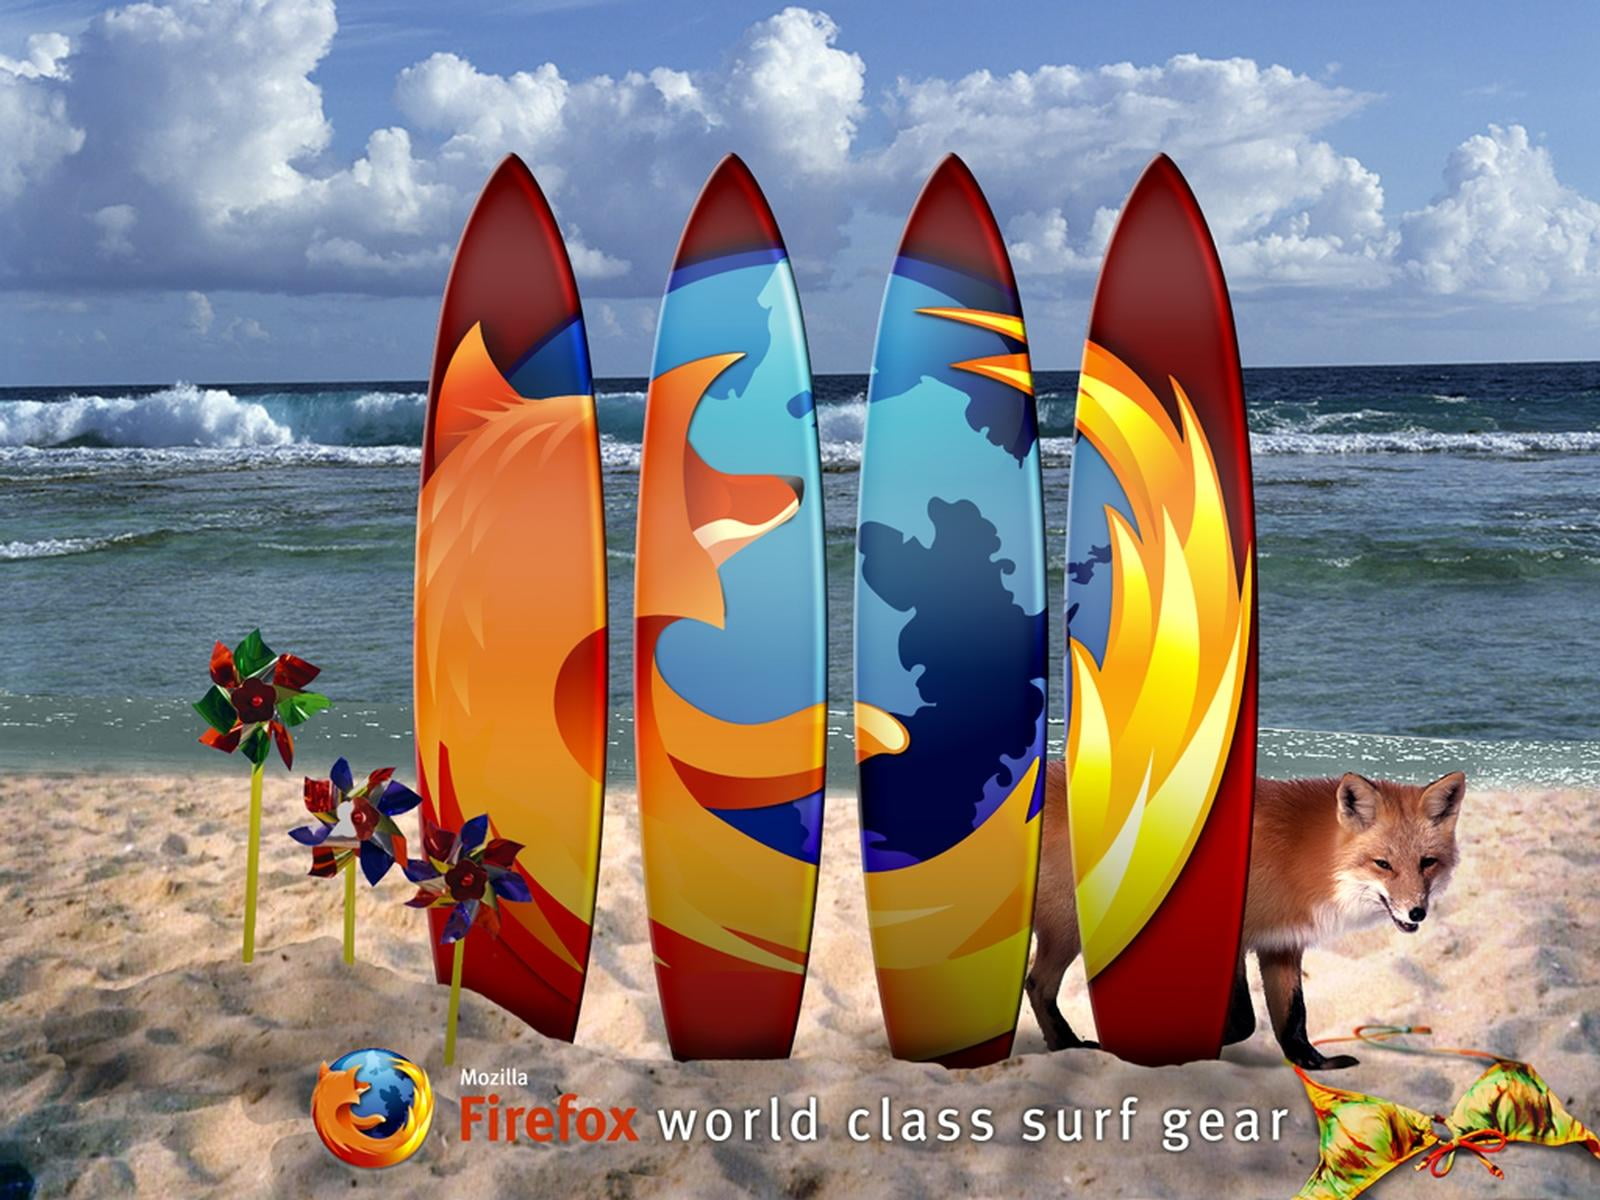 Firefox Surf, multicolored surfboards with text overlay, Computers